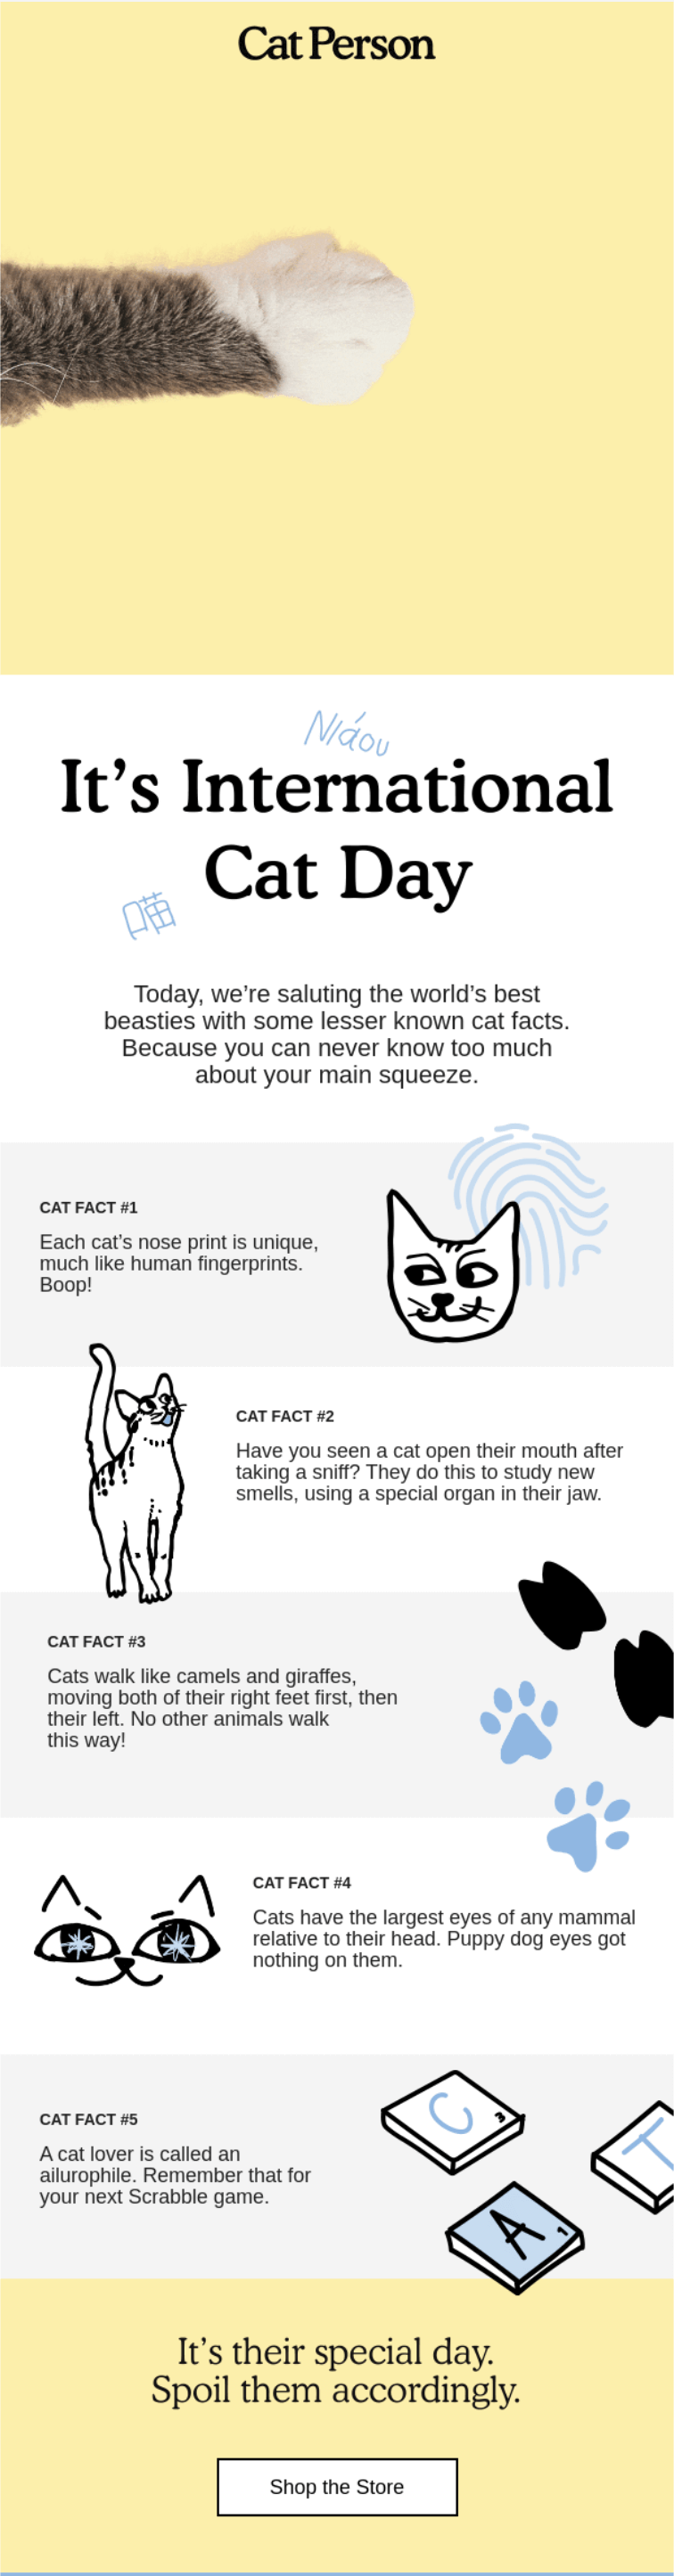 Cat person email newsletter